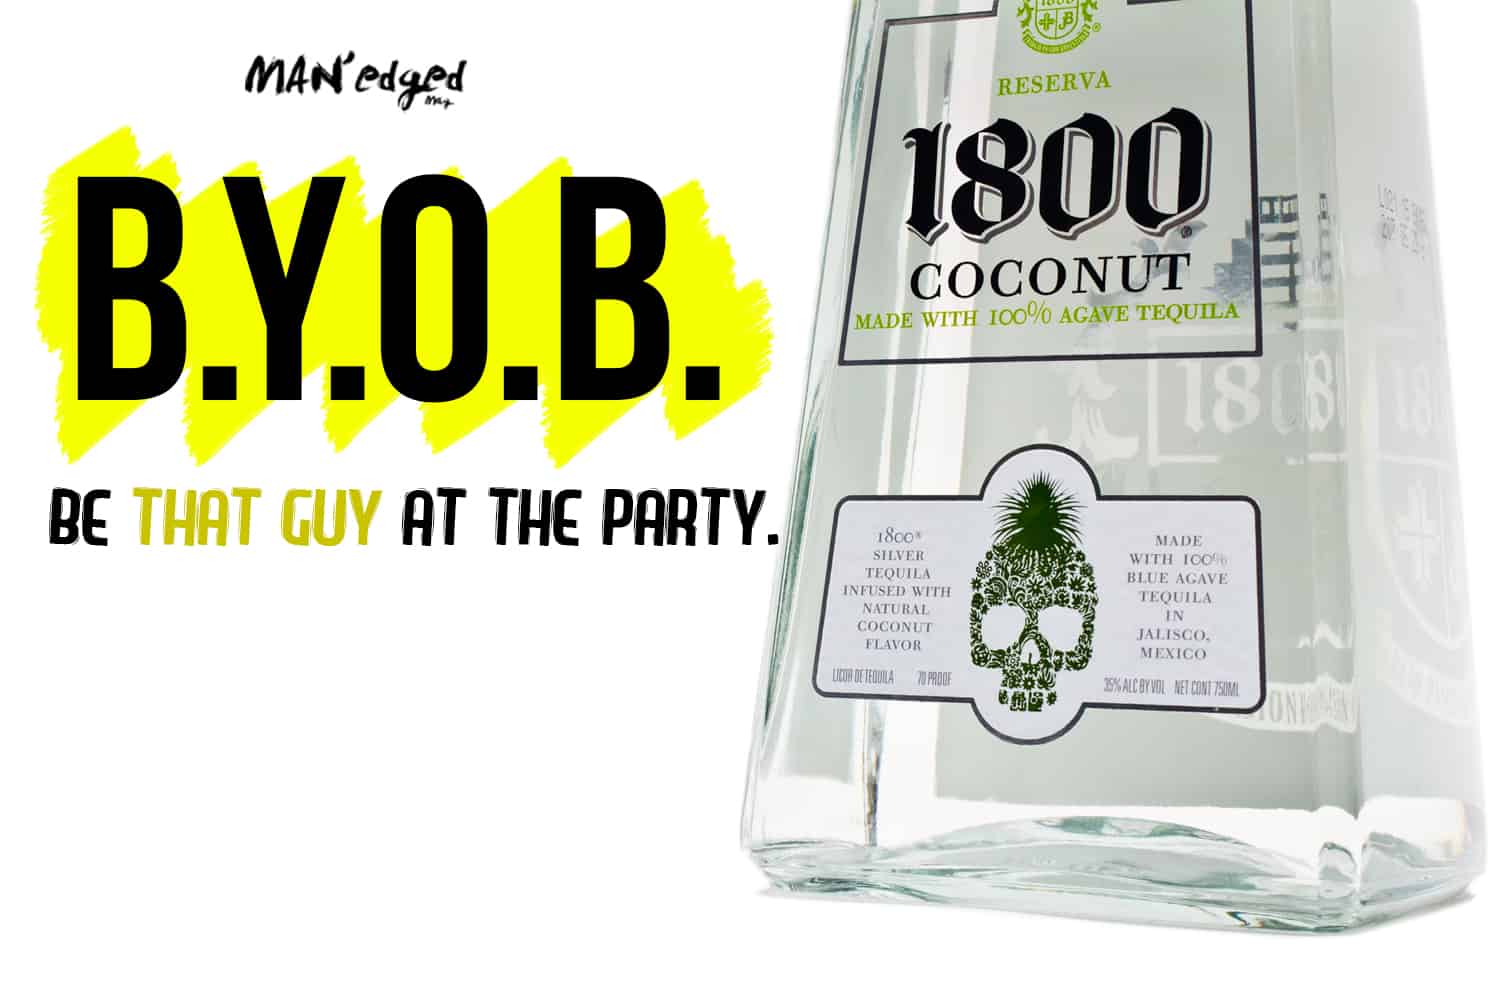 BYOB "be that guy at the party" words next to 1800 Tequila alcohol bottle, Cinco De Mayo 